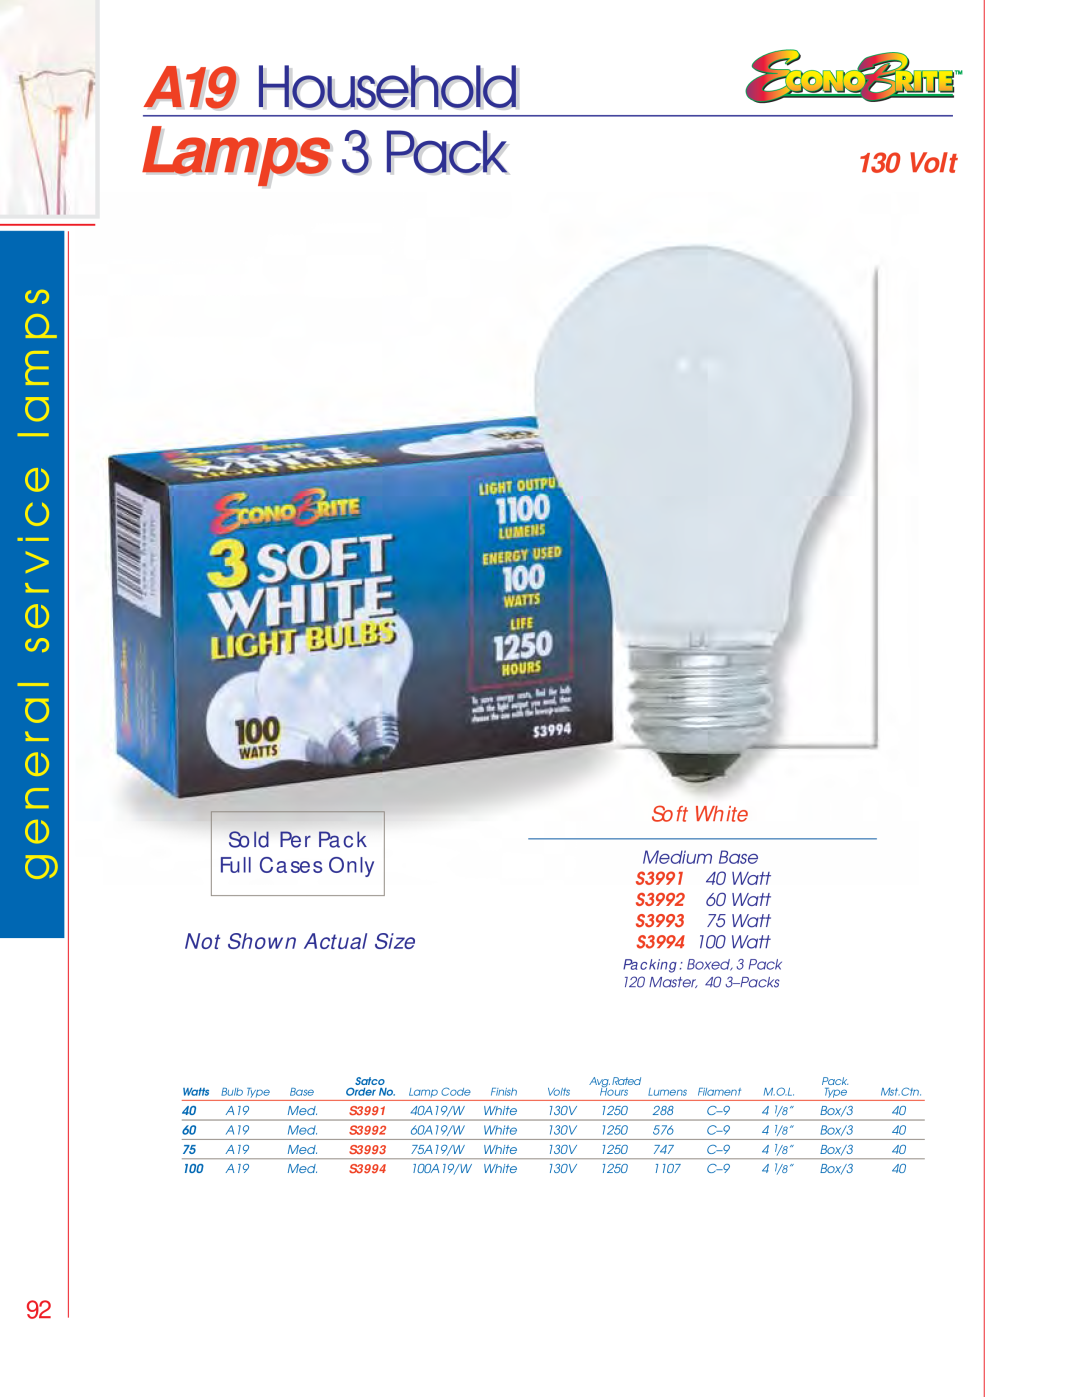 Satco Products S3680 Lamps 3 Pack, A19 Householdld, Volt, Soft White, Sold Per Pack, Full Cases Only, S3991, S3992, S3993 